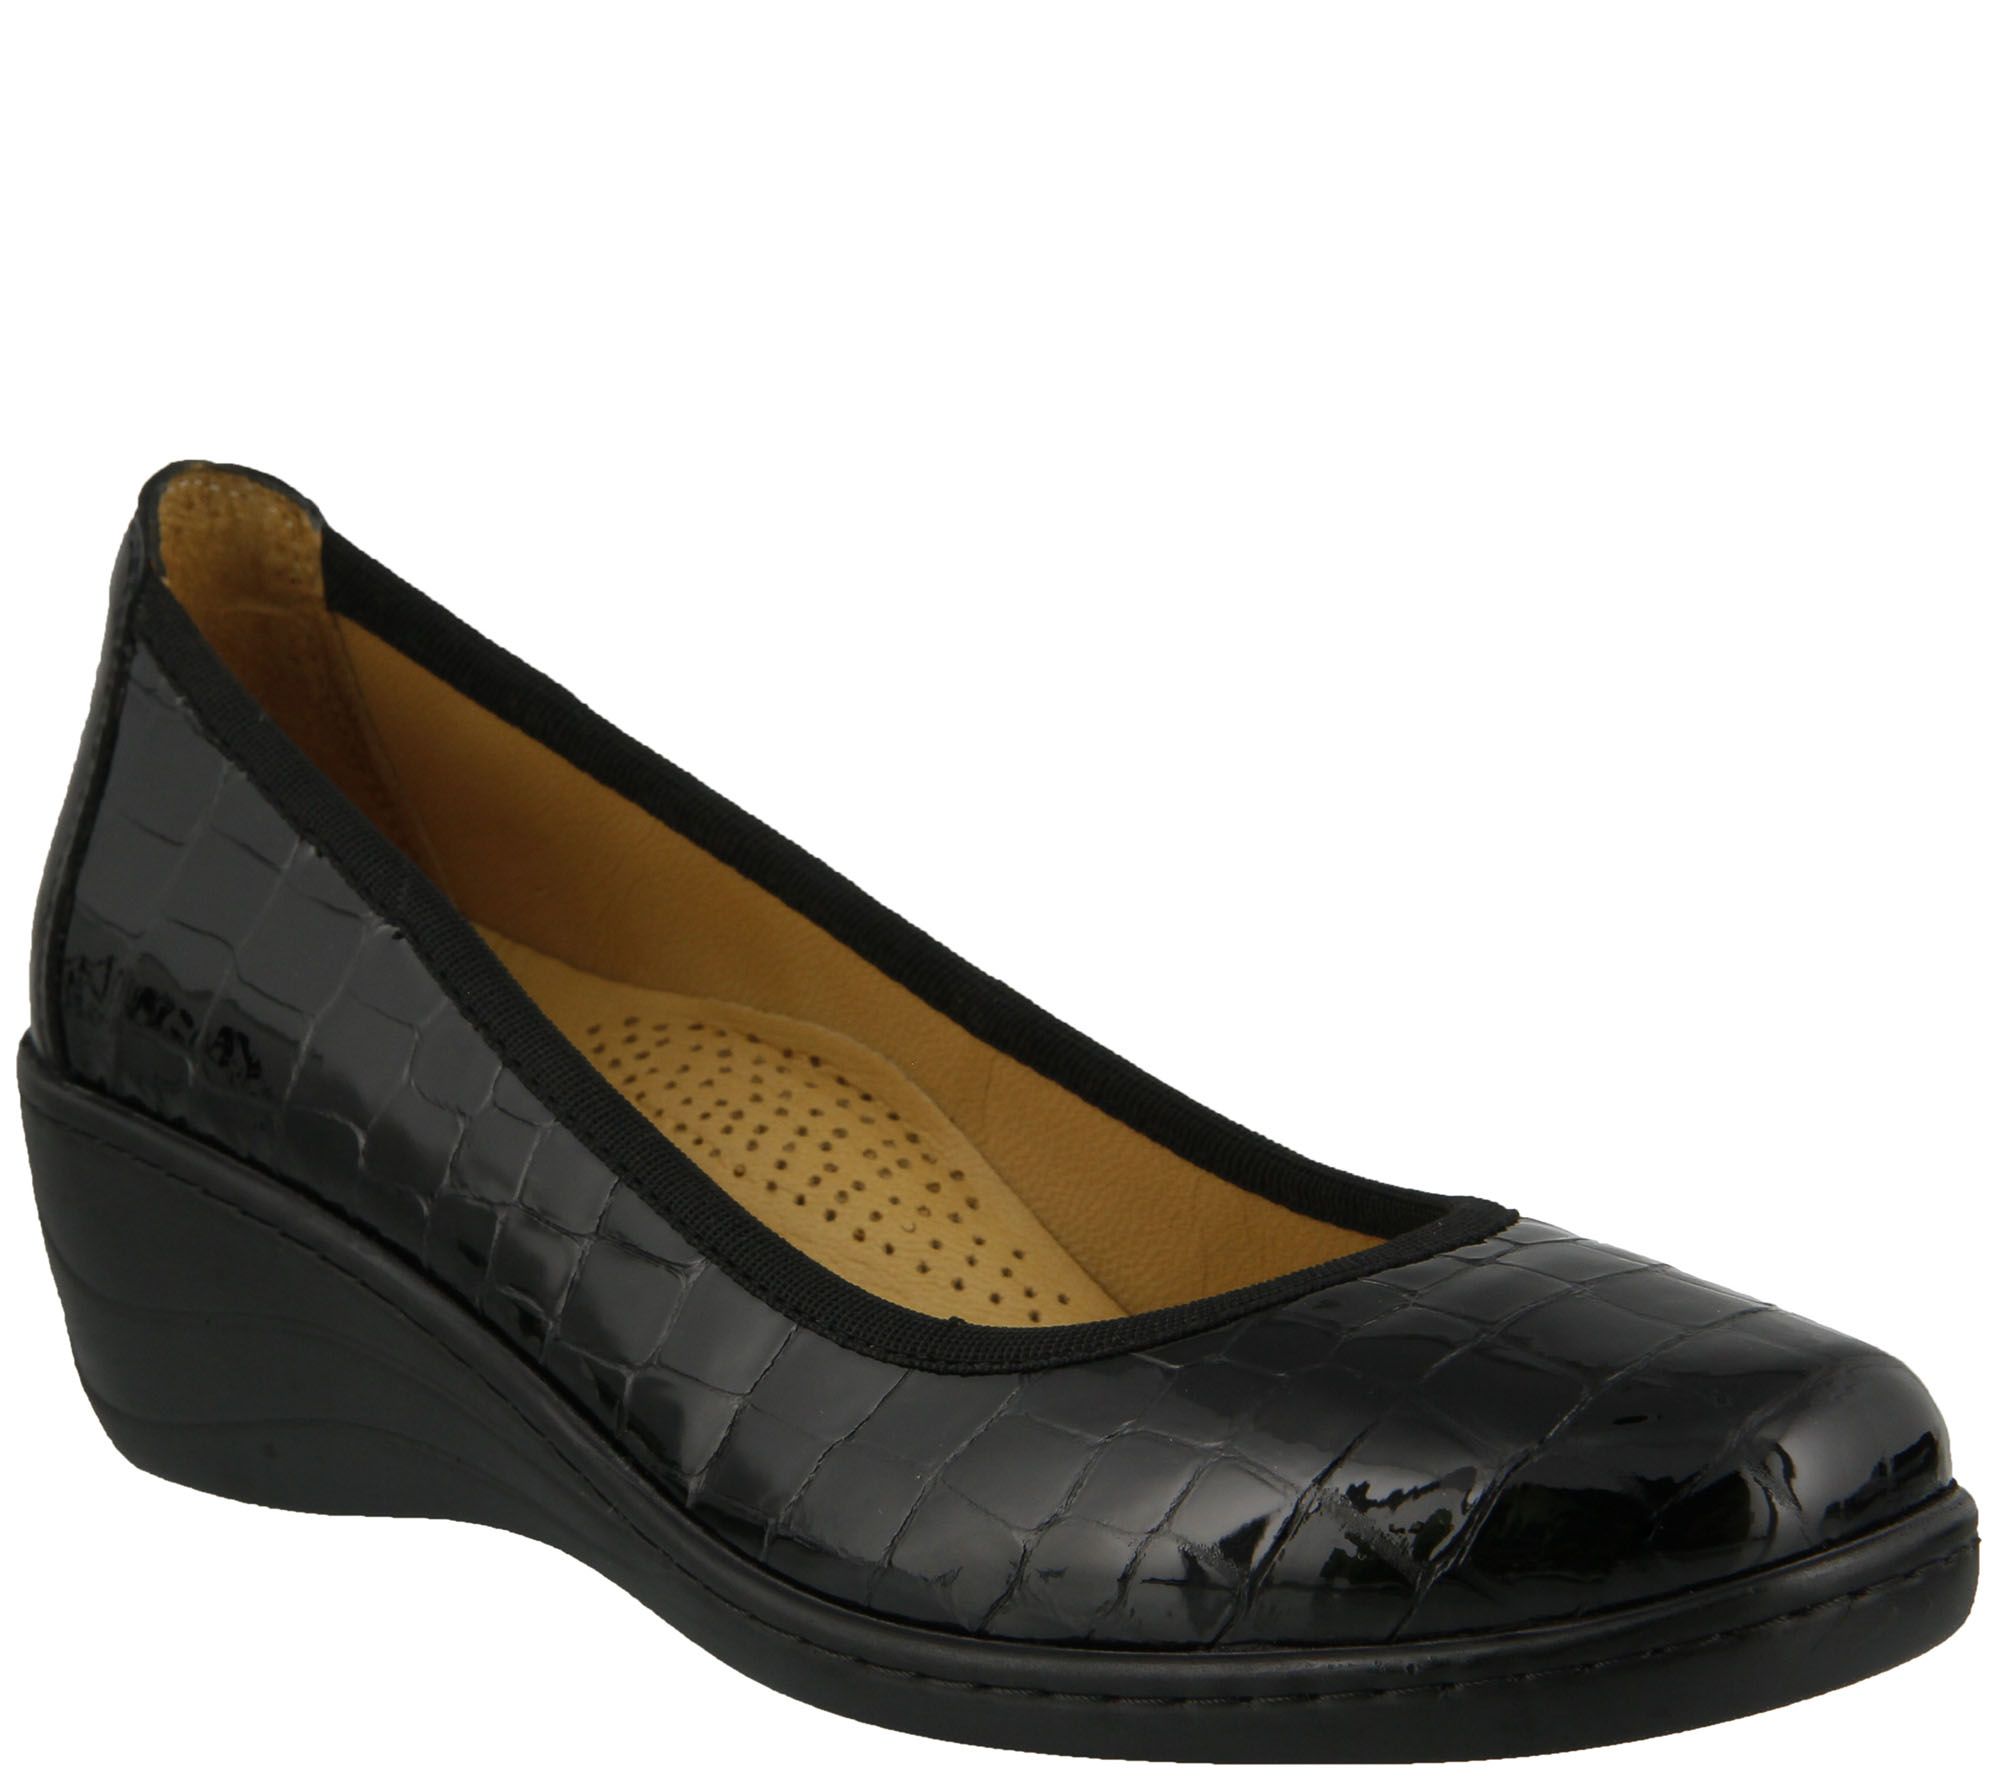 Spring Step Slip-on Patent Leather Shoes - Kartii - QVC.com